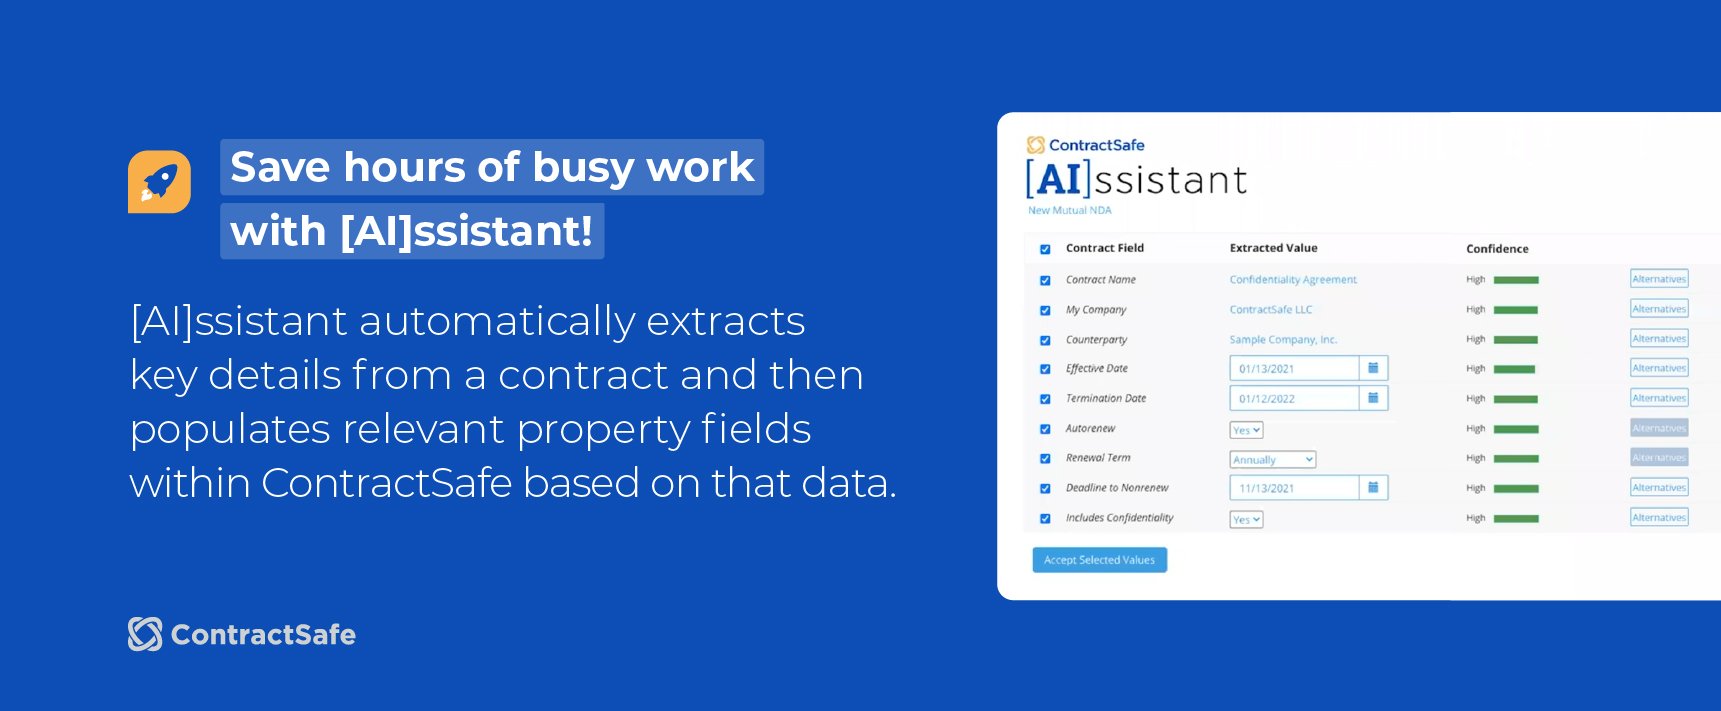 Save hours of busy work with [AI]ssistant! [AI]ssistant automatically extracts key details frm a contract and then populates relevant property fields within ContractSafe based on data.